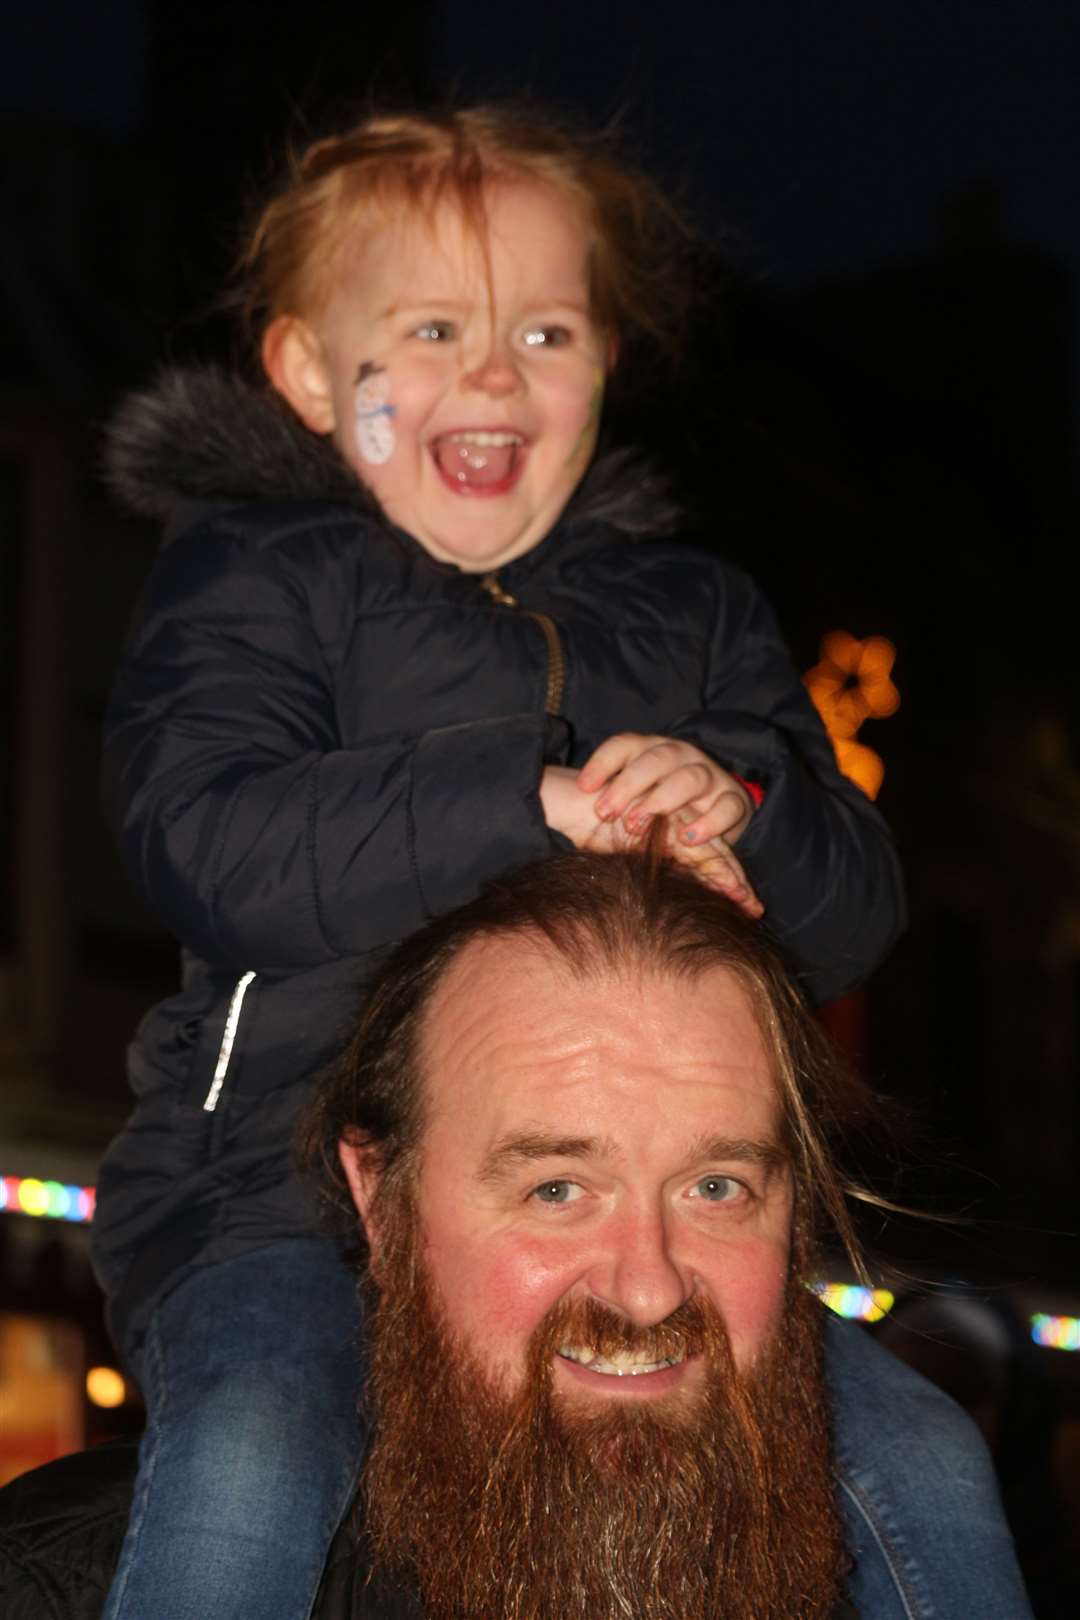 Paisley Macdonald's face says it all – she really enjoyed the moment the Christmas tree lights were switched on. Dad Gordie makes sure she gets a good view. Picture: Eswyl Fell